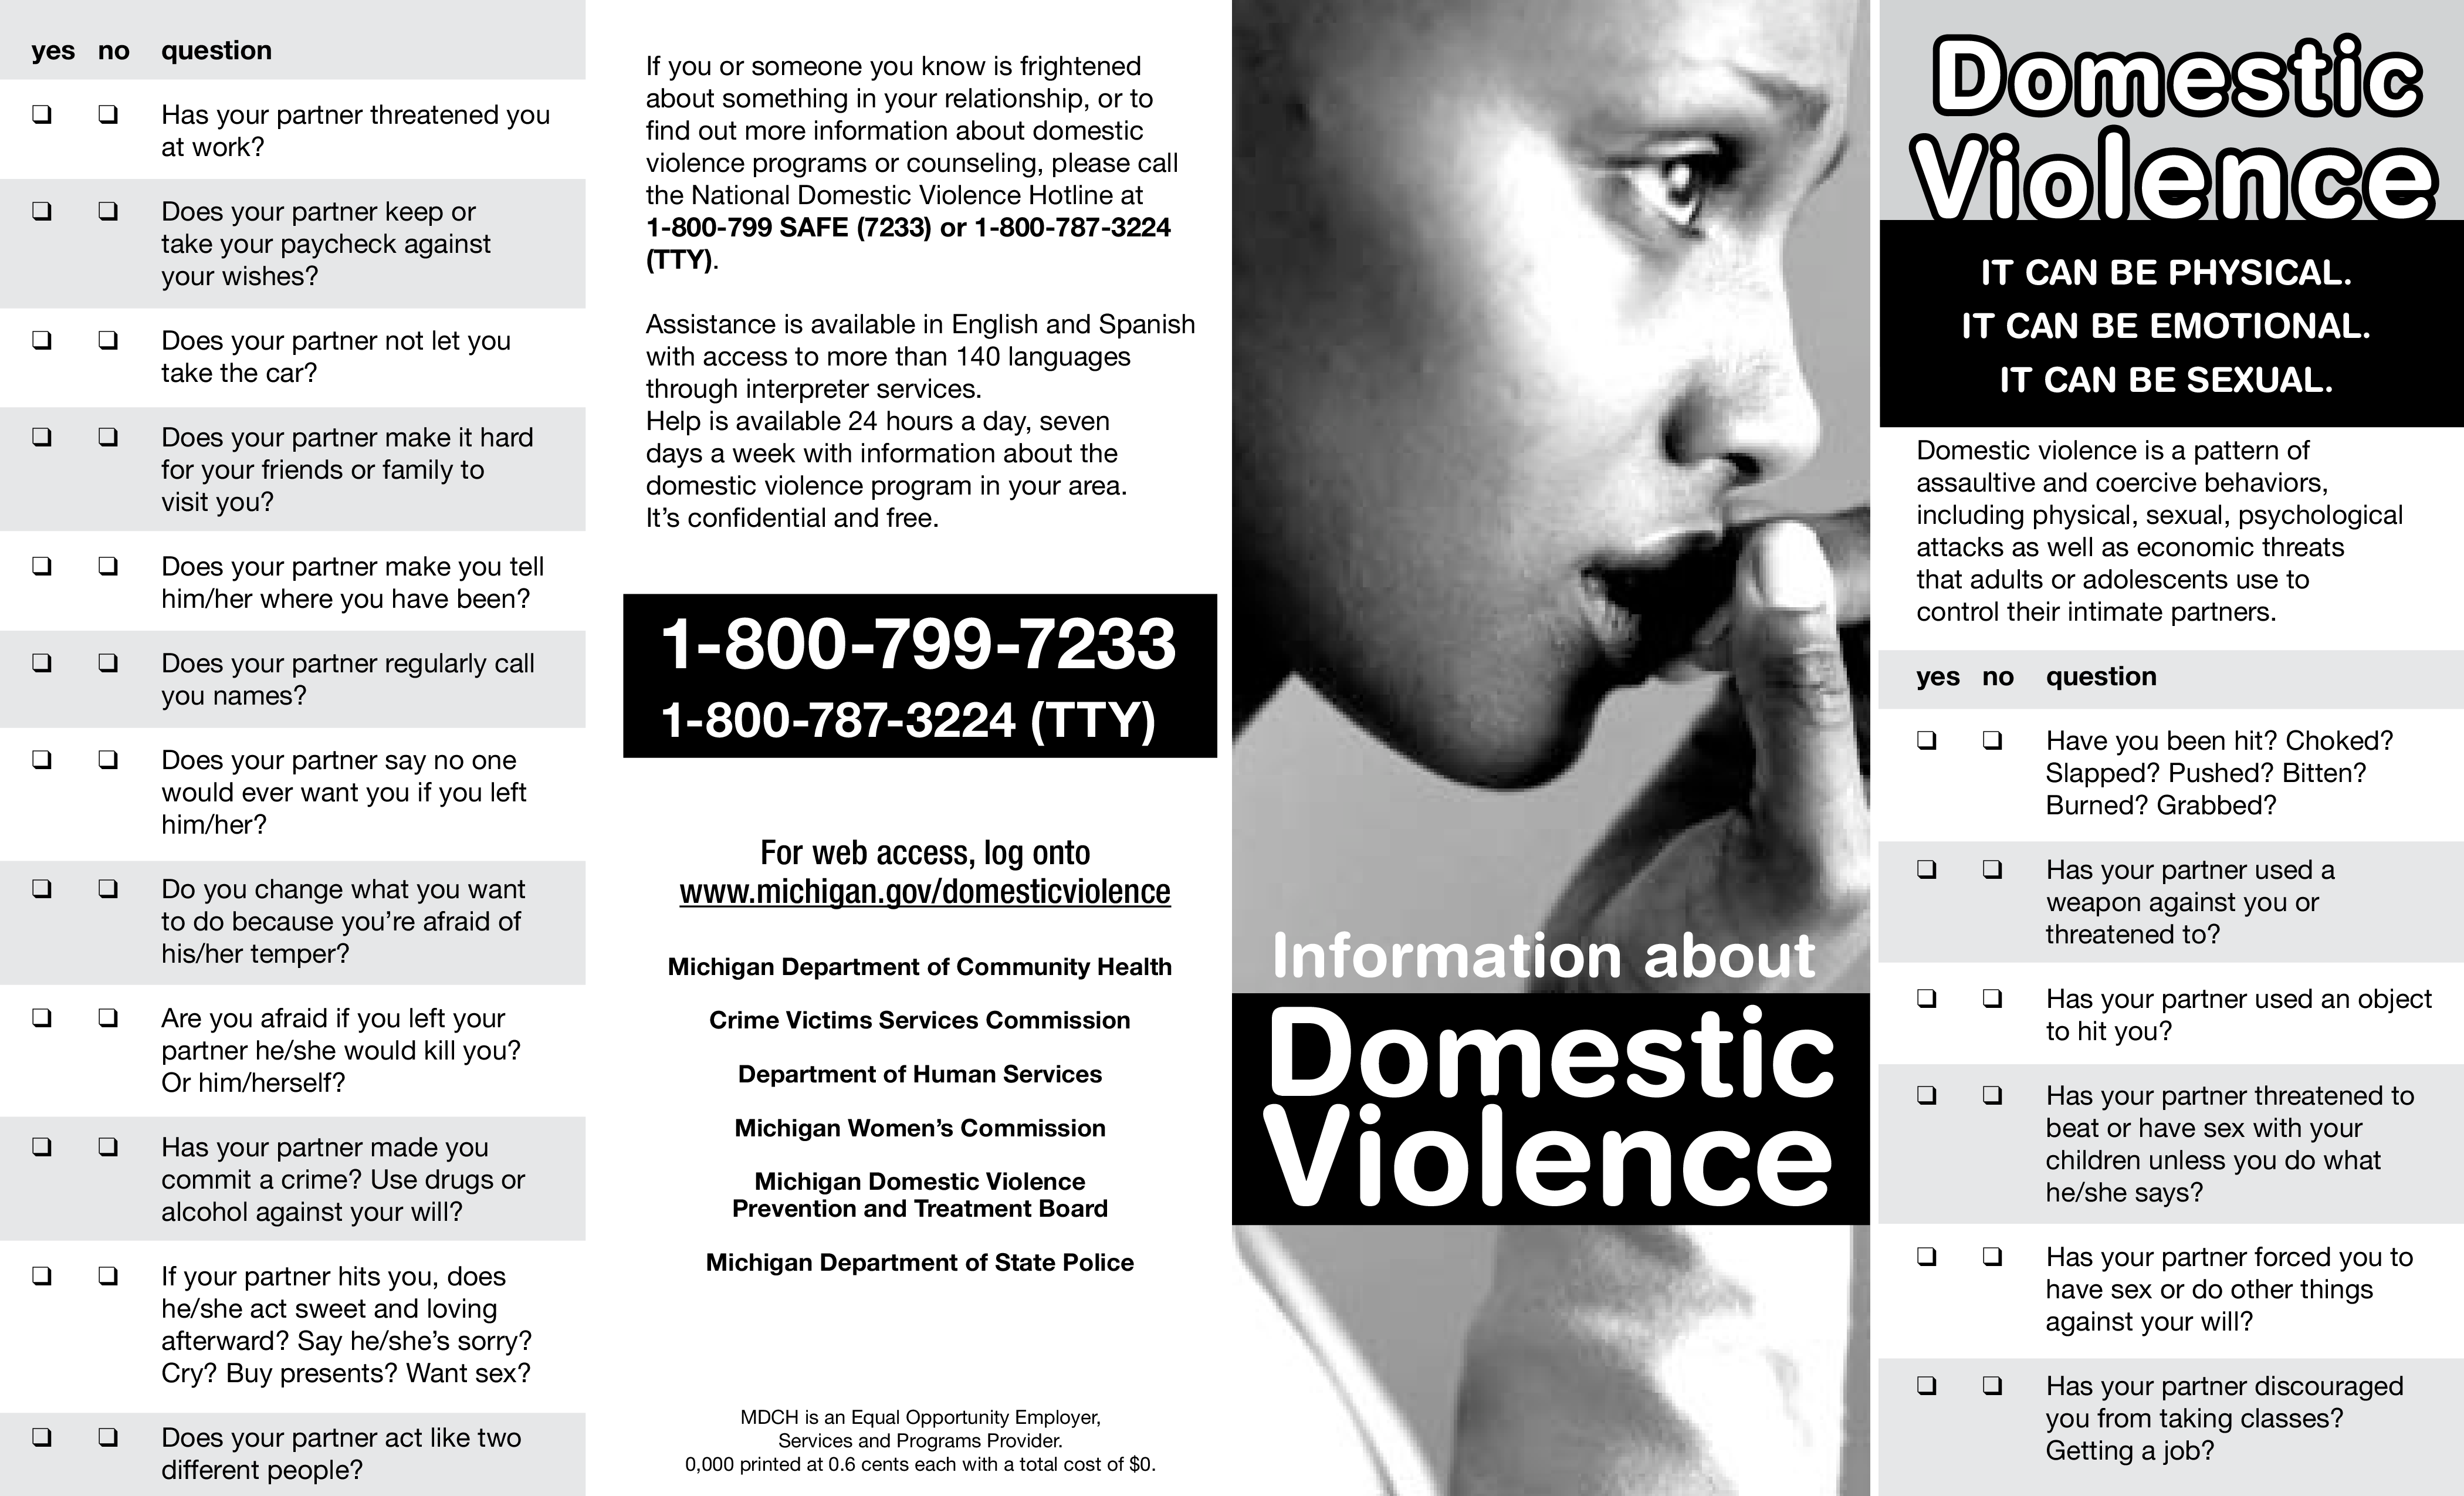 research on domestic violence pdf